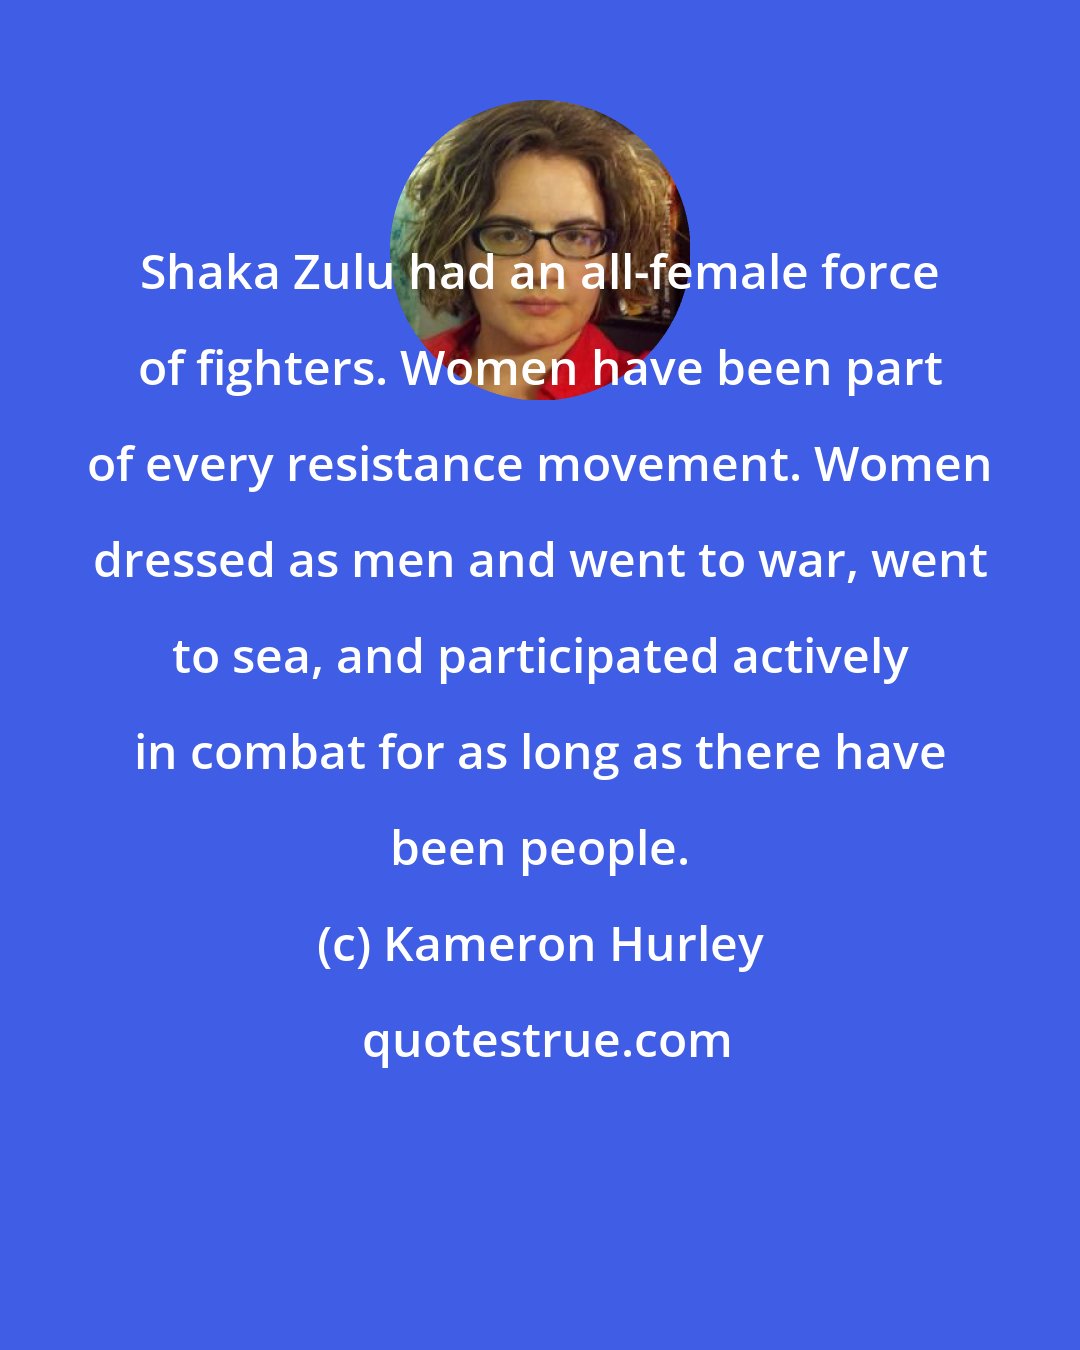 Kameron Hurley: Shaka Zulu had an all-female force of fighters. Women have been part of every resistance movement. Women dressed as men and went to war, went to sea, and participated actively in combat for as long as there have been people.